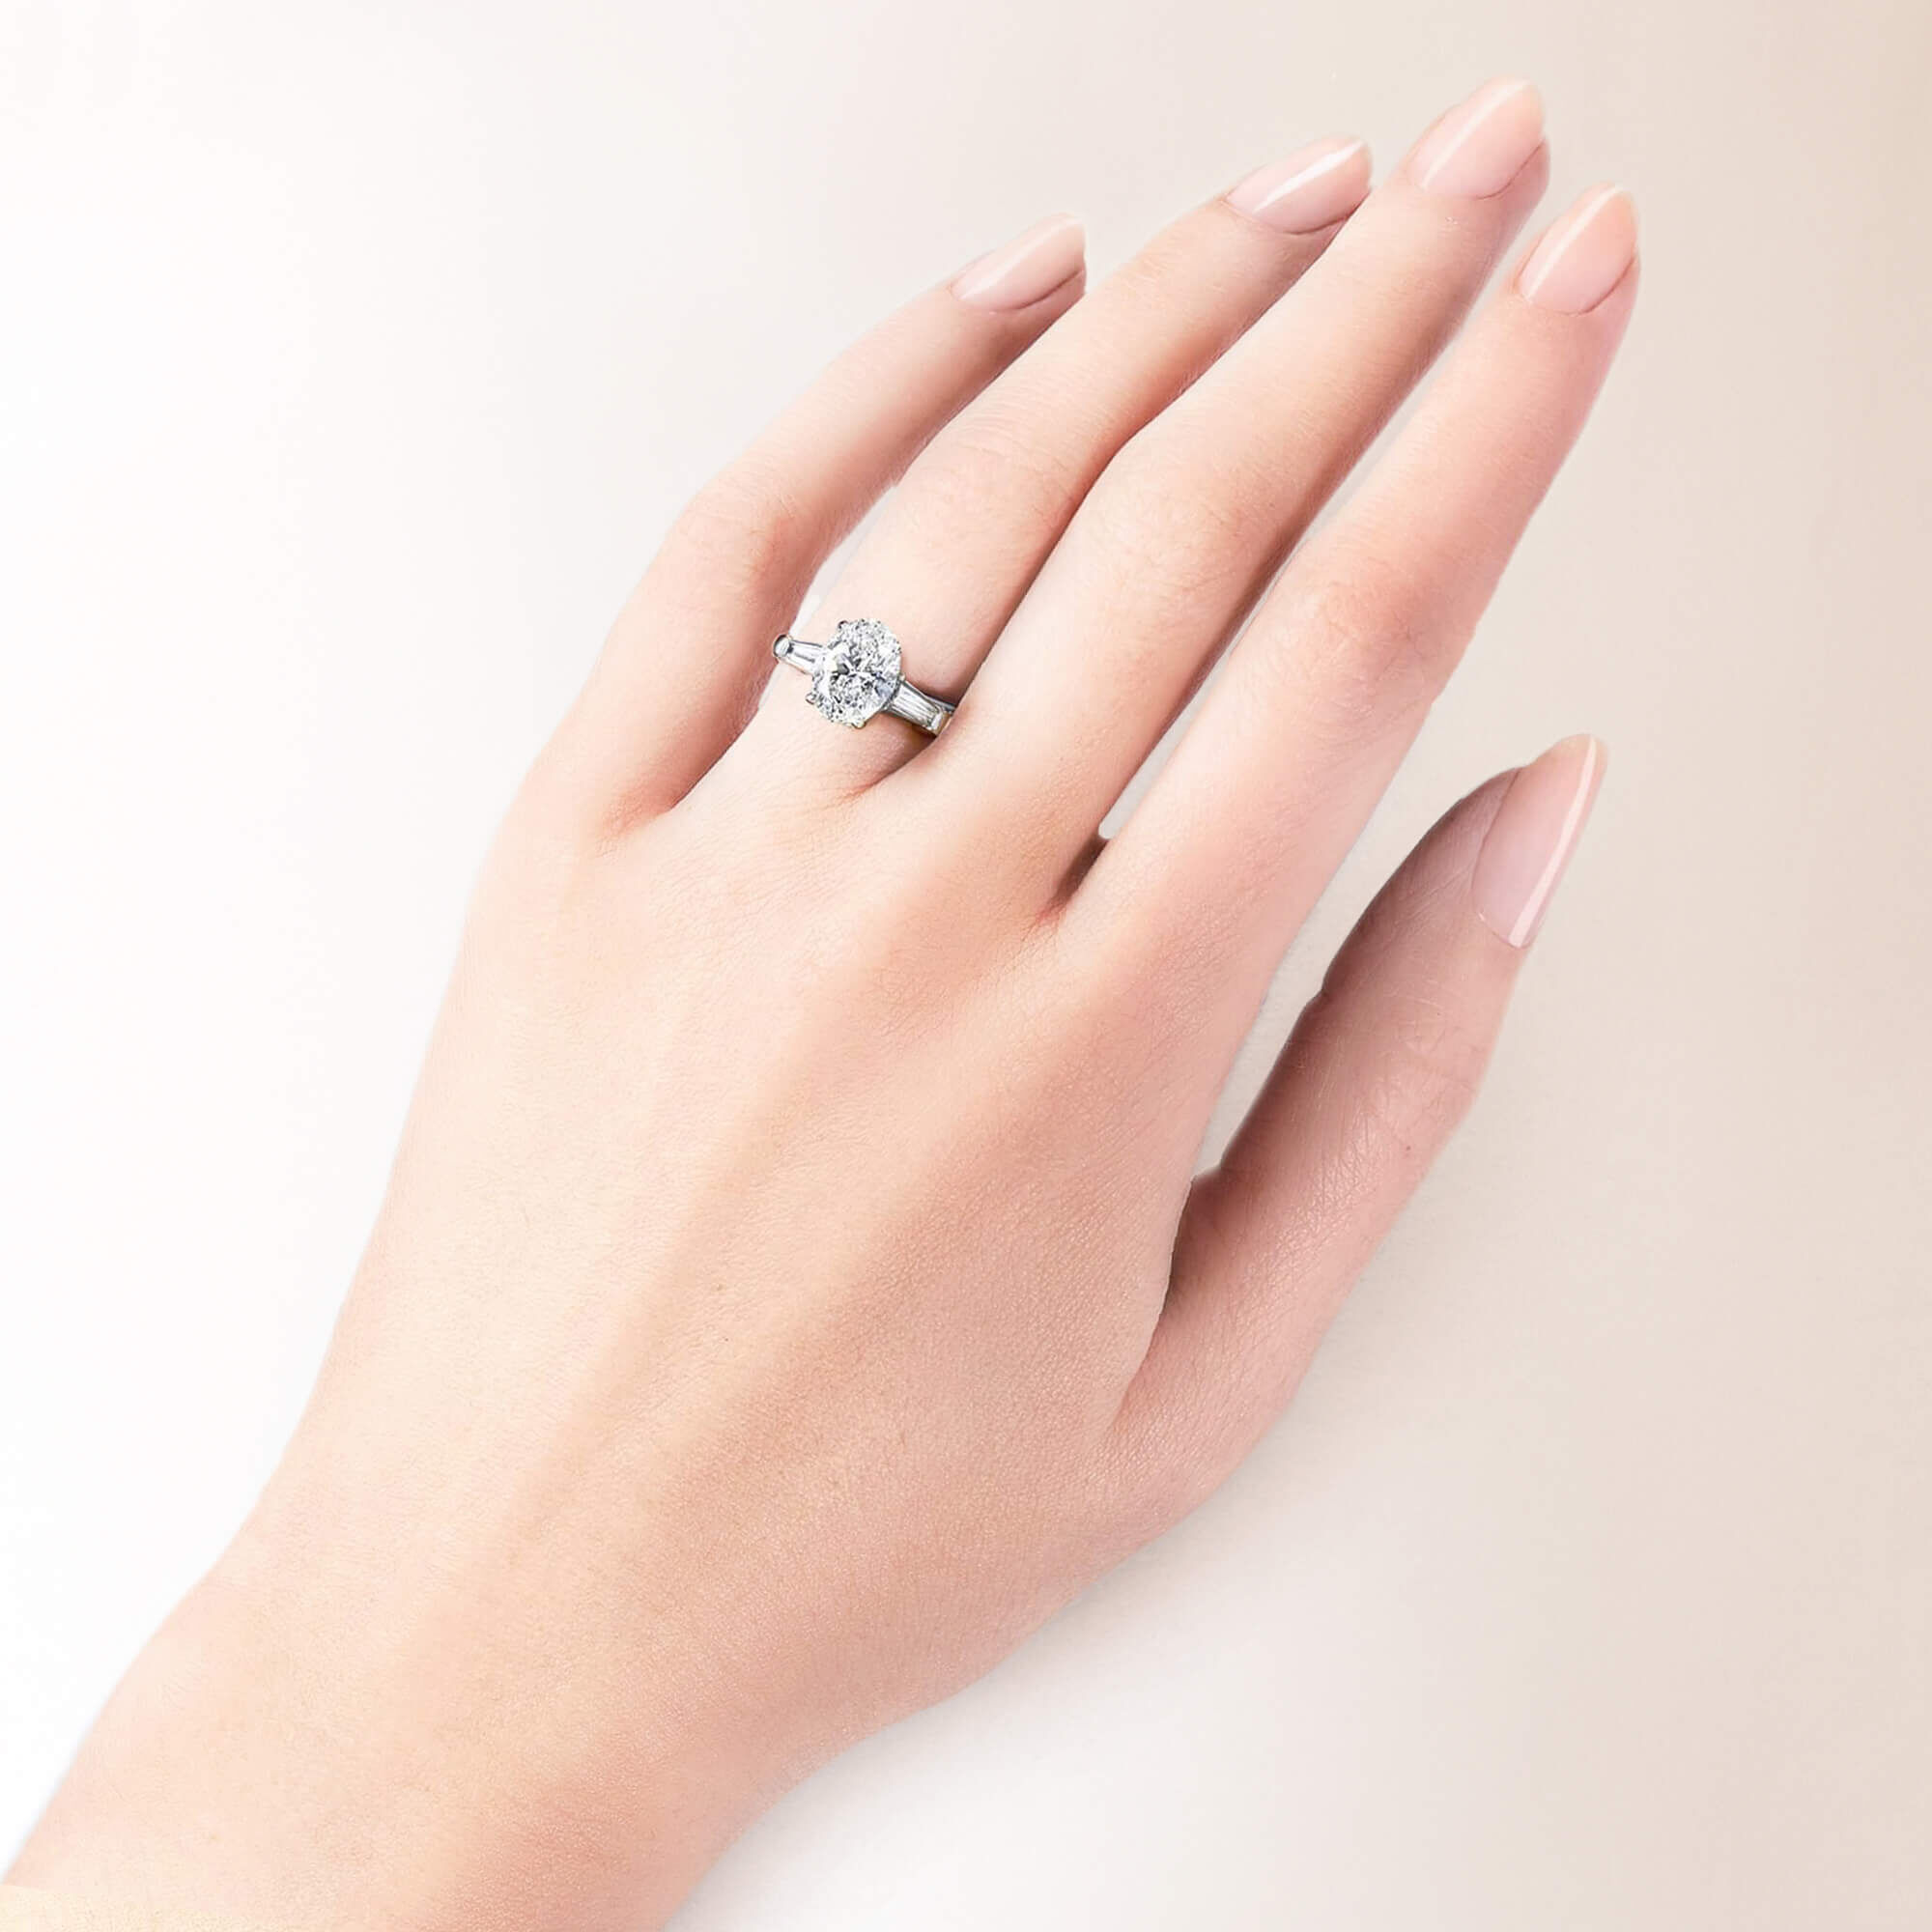 A models hand wearing a Graff oval shape diamond engagement ring